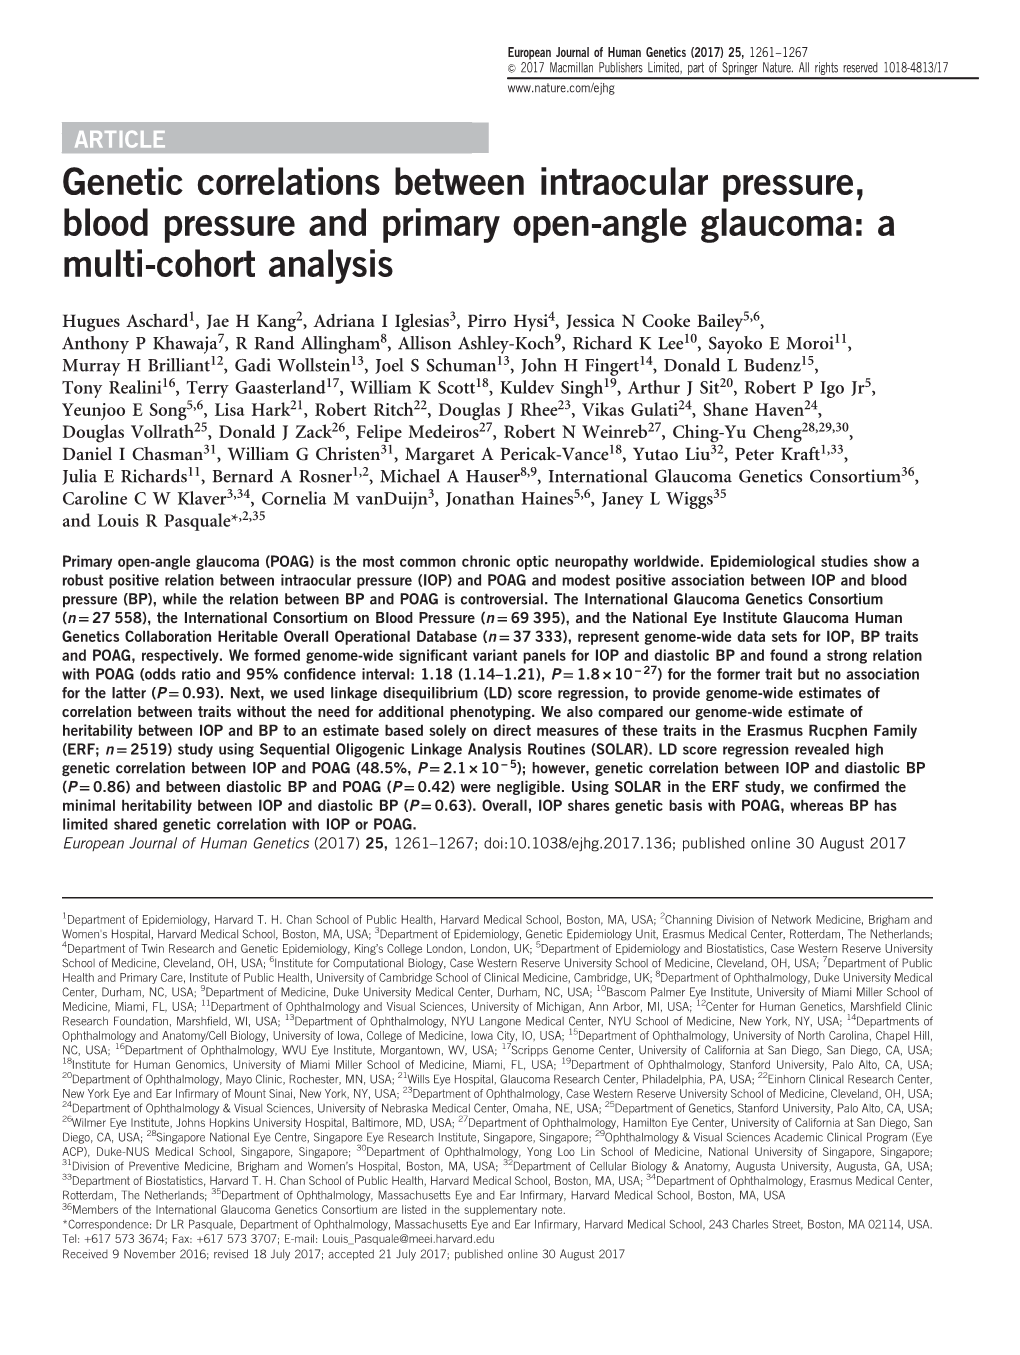 Genetic Correlations Between Intraocular Pressure, Blood Pressure and Primary Open-Angle Glaucoma: a Multi-Cohort Analysis